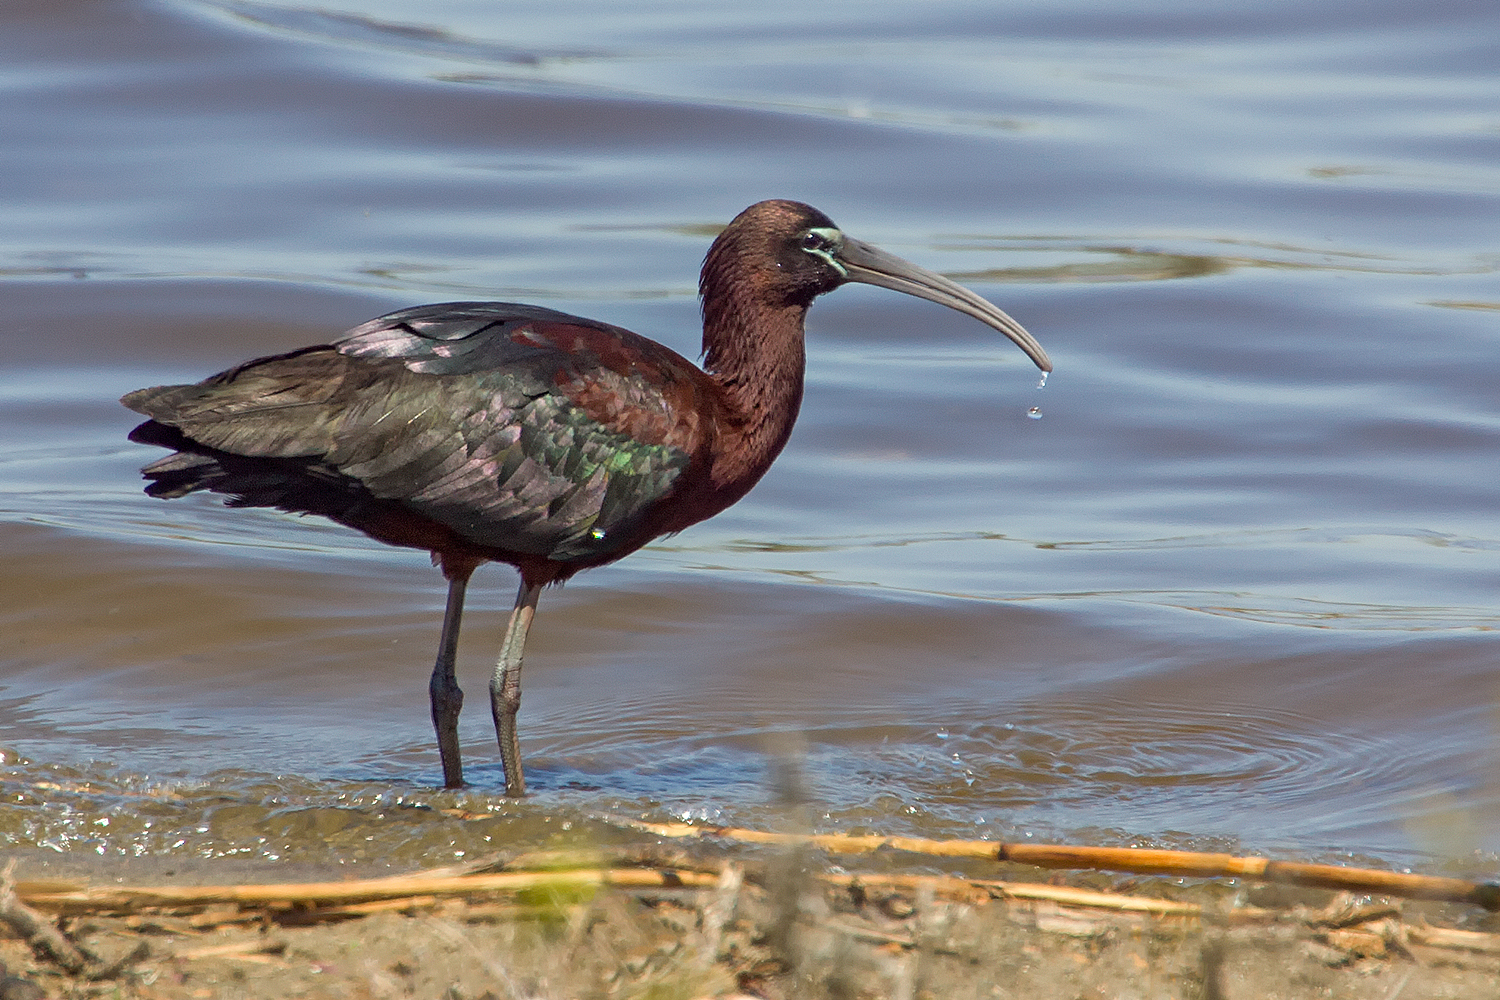 Glossy Ibis come from nesting islands in Jamaica Bay to feed in the marshes around the West Pond. Photo: <a href="https://www.pbase.com/btblue" target="_blank">Lloyd Spitalnik</a>